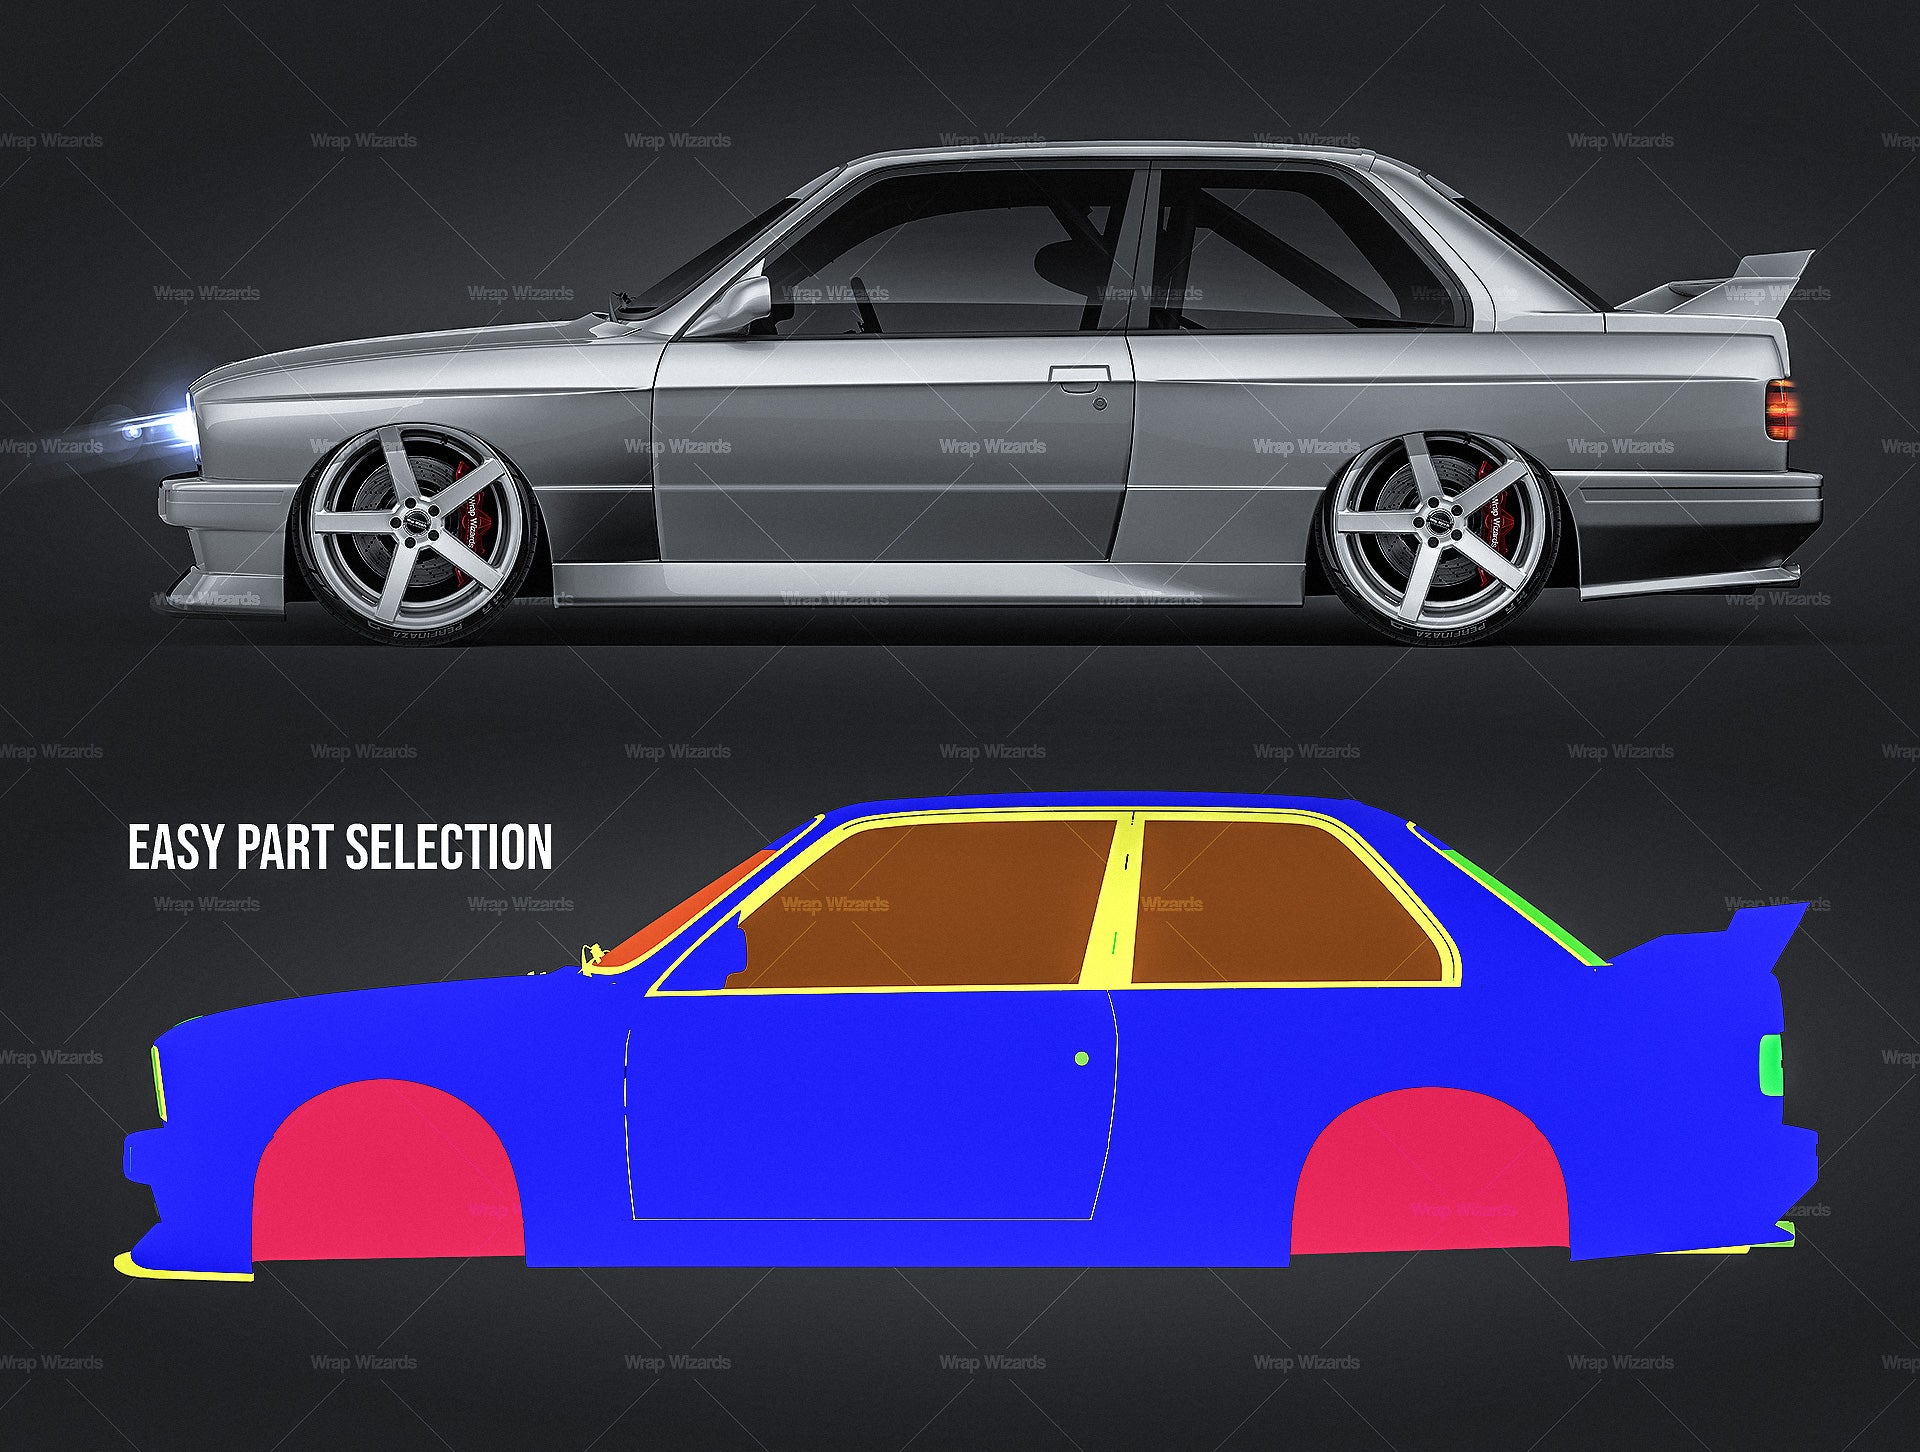 BMW M3 E30 Warsteiner glossy finish - all sides Car Mockup Template.psd